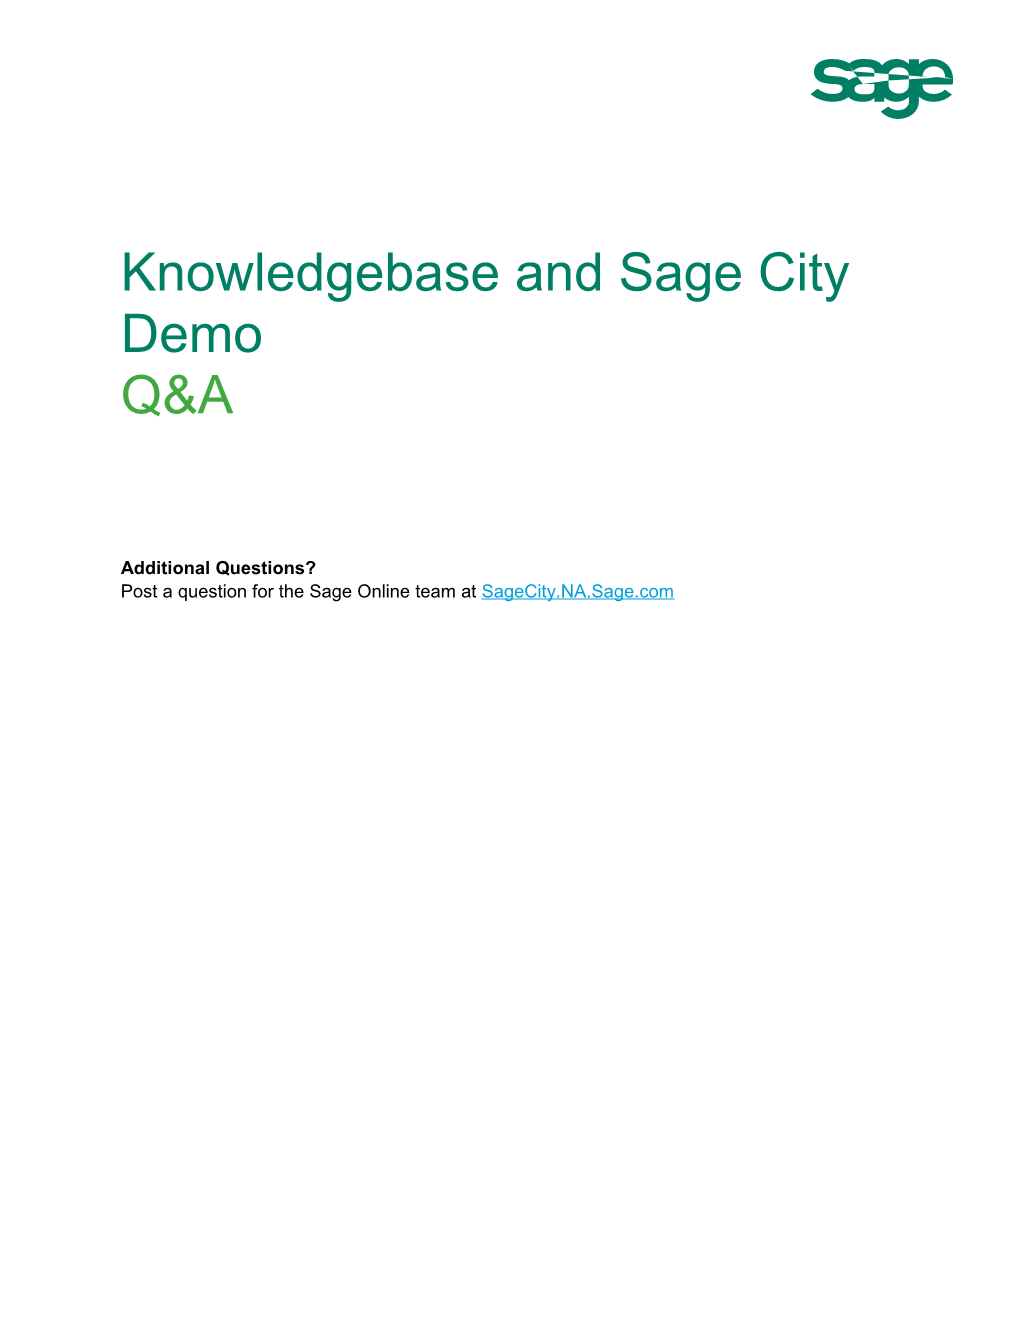 Knowledgebase and Sage City Demo